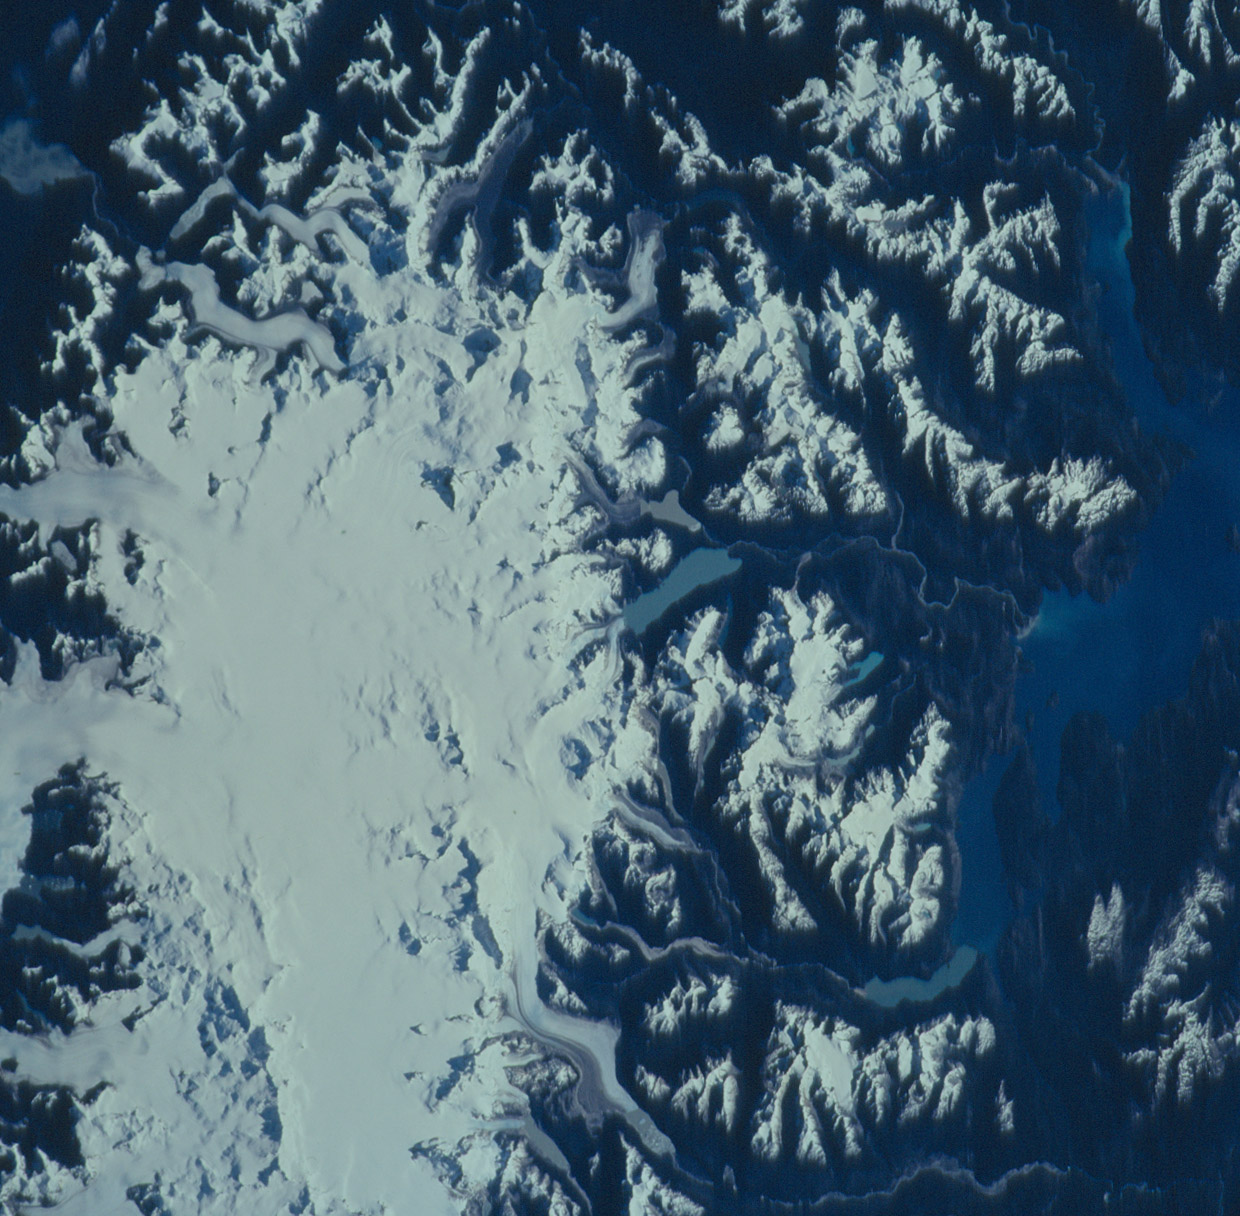 Northern Patagonian Ice Field, Chile - related image preview